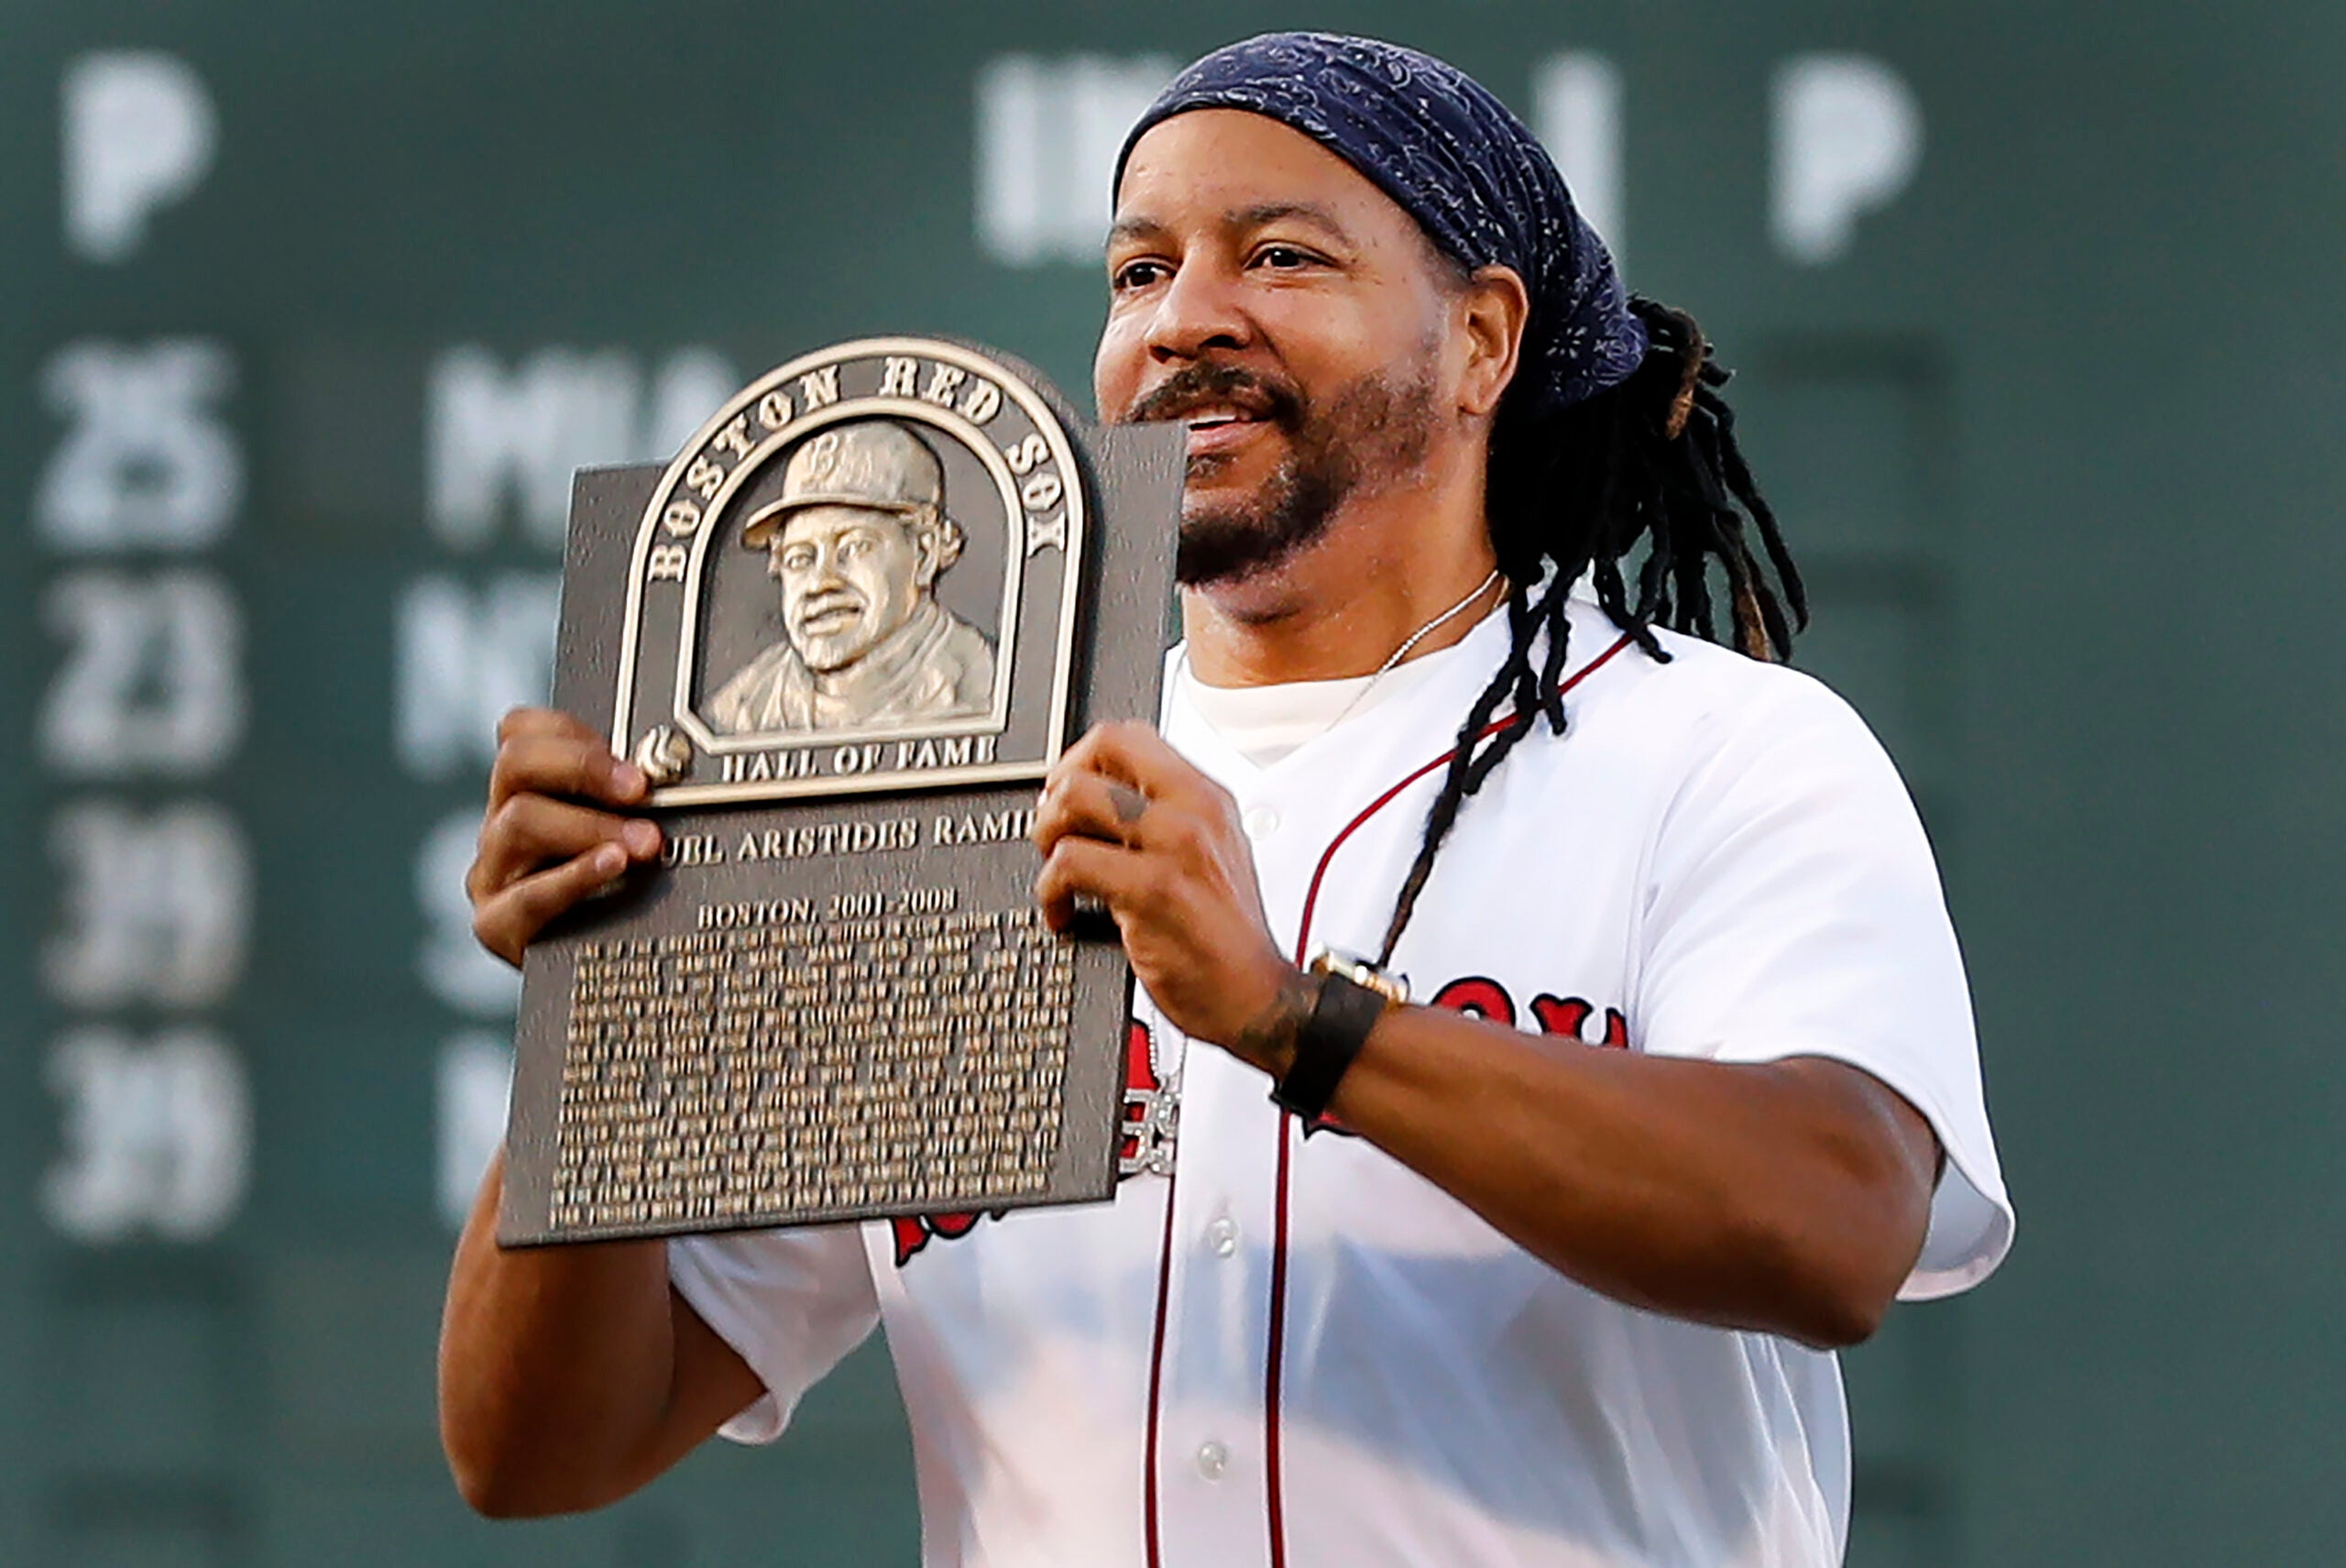 Before the game, Manny Ramirez, who was selected for the Red Sox Hall of Fame last month, but who was not prersent at that ceremony was on hand to recieve his plaque tonight. Boston Red Sox hosted the Detroit Tigers in a regular season MLB baseball game at Fenway Park.